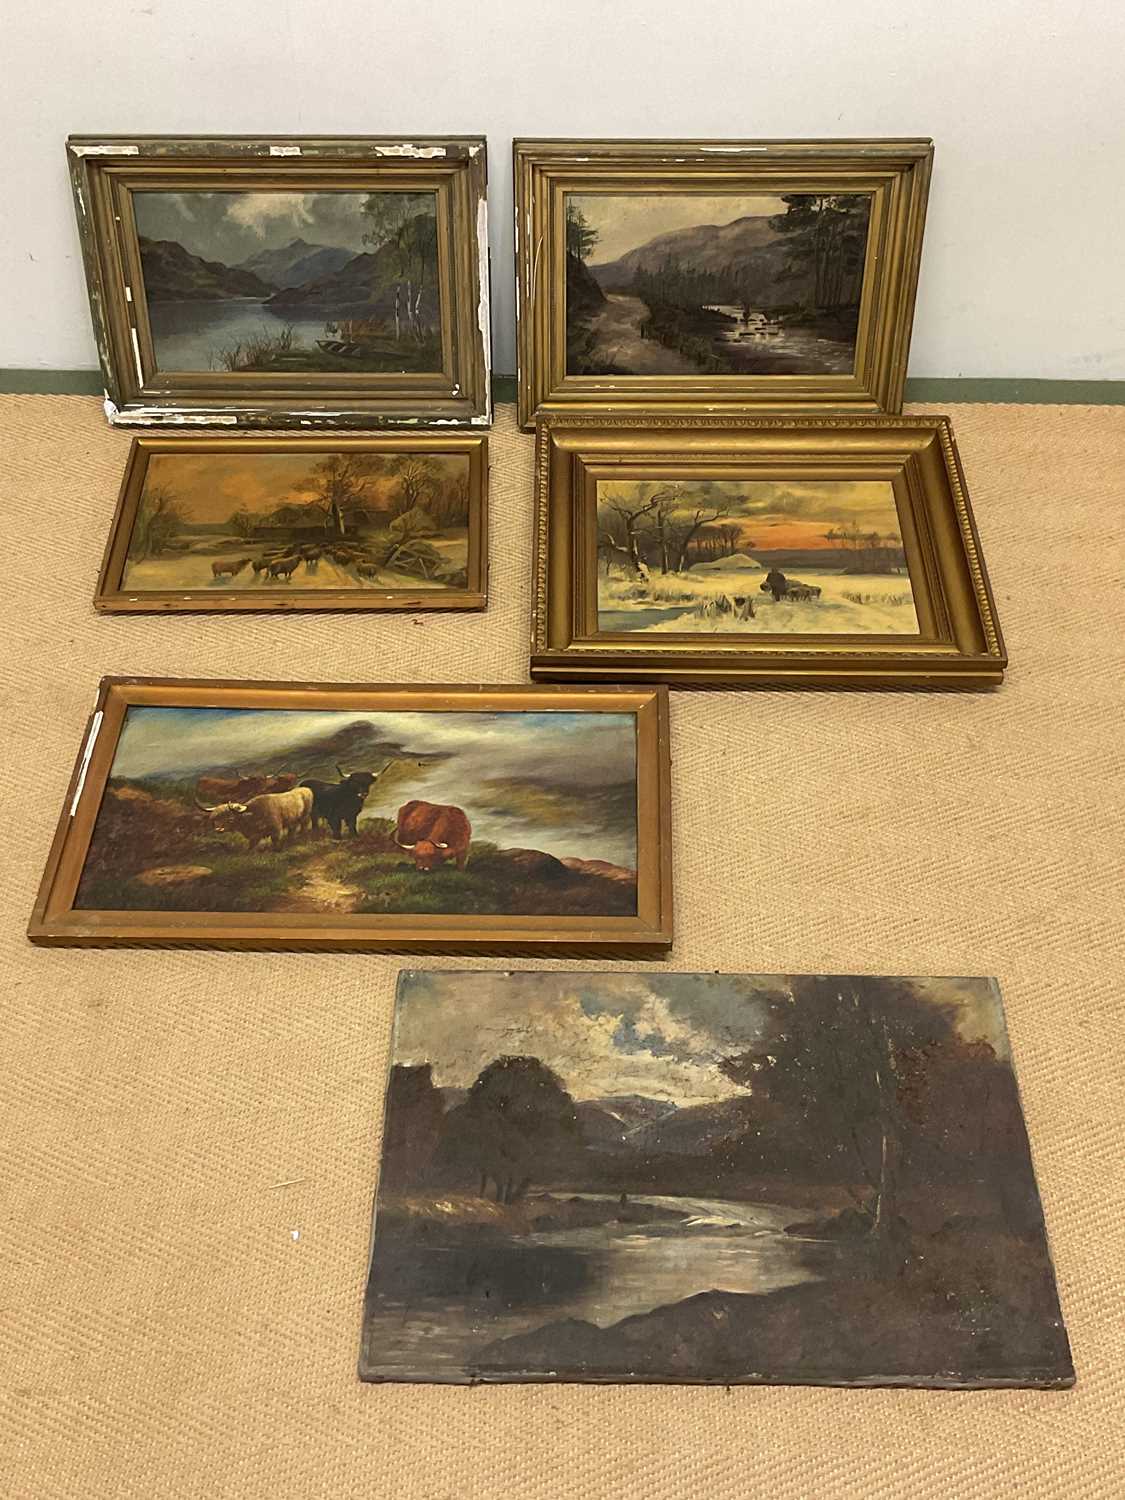 UNATTRIBUTED; six oils on canvas, late 19th/early 20th century landscape paintings, largest 41 x